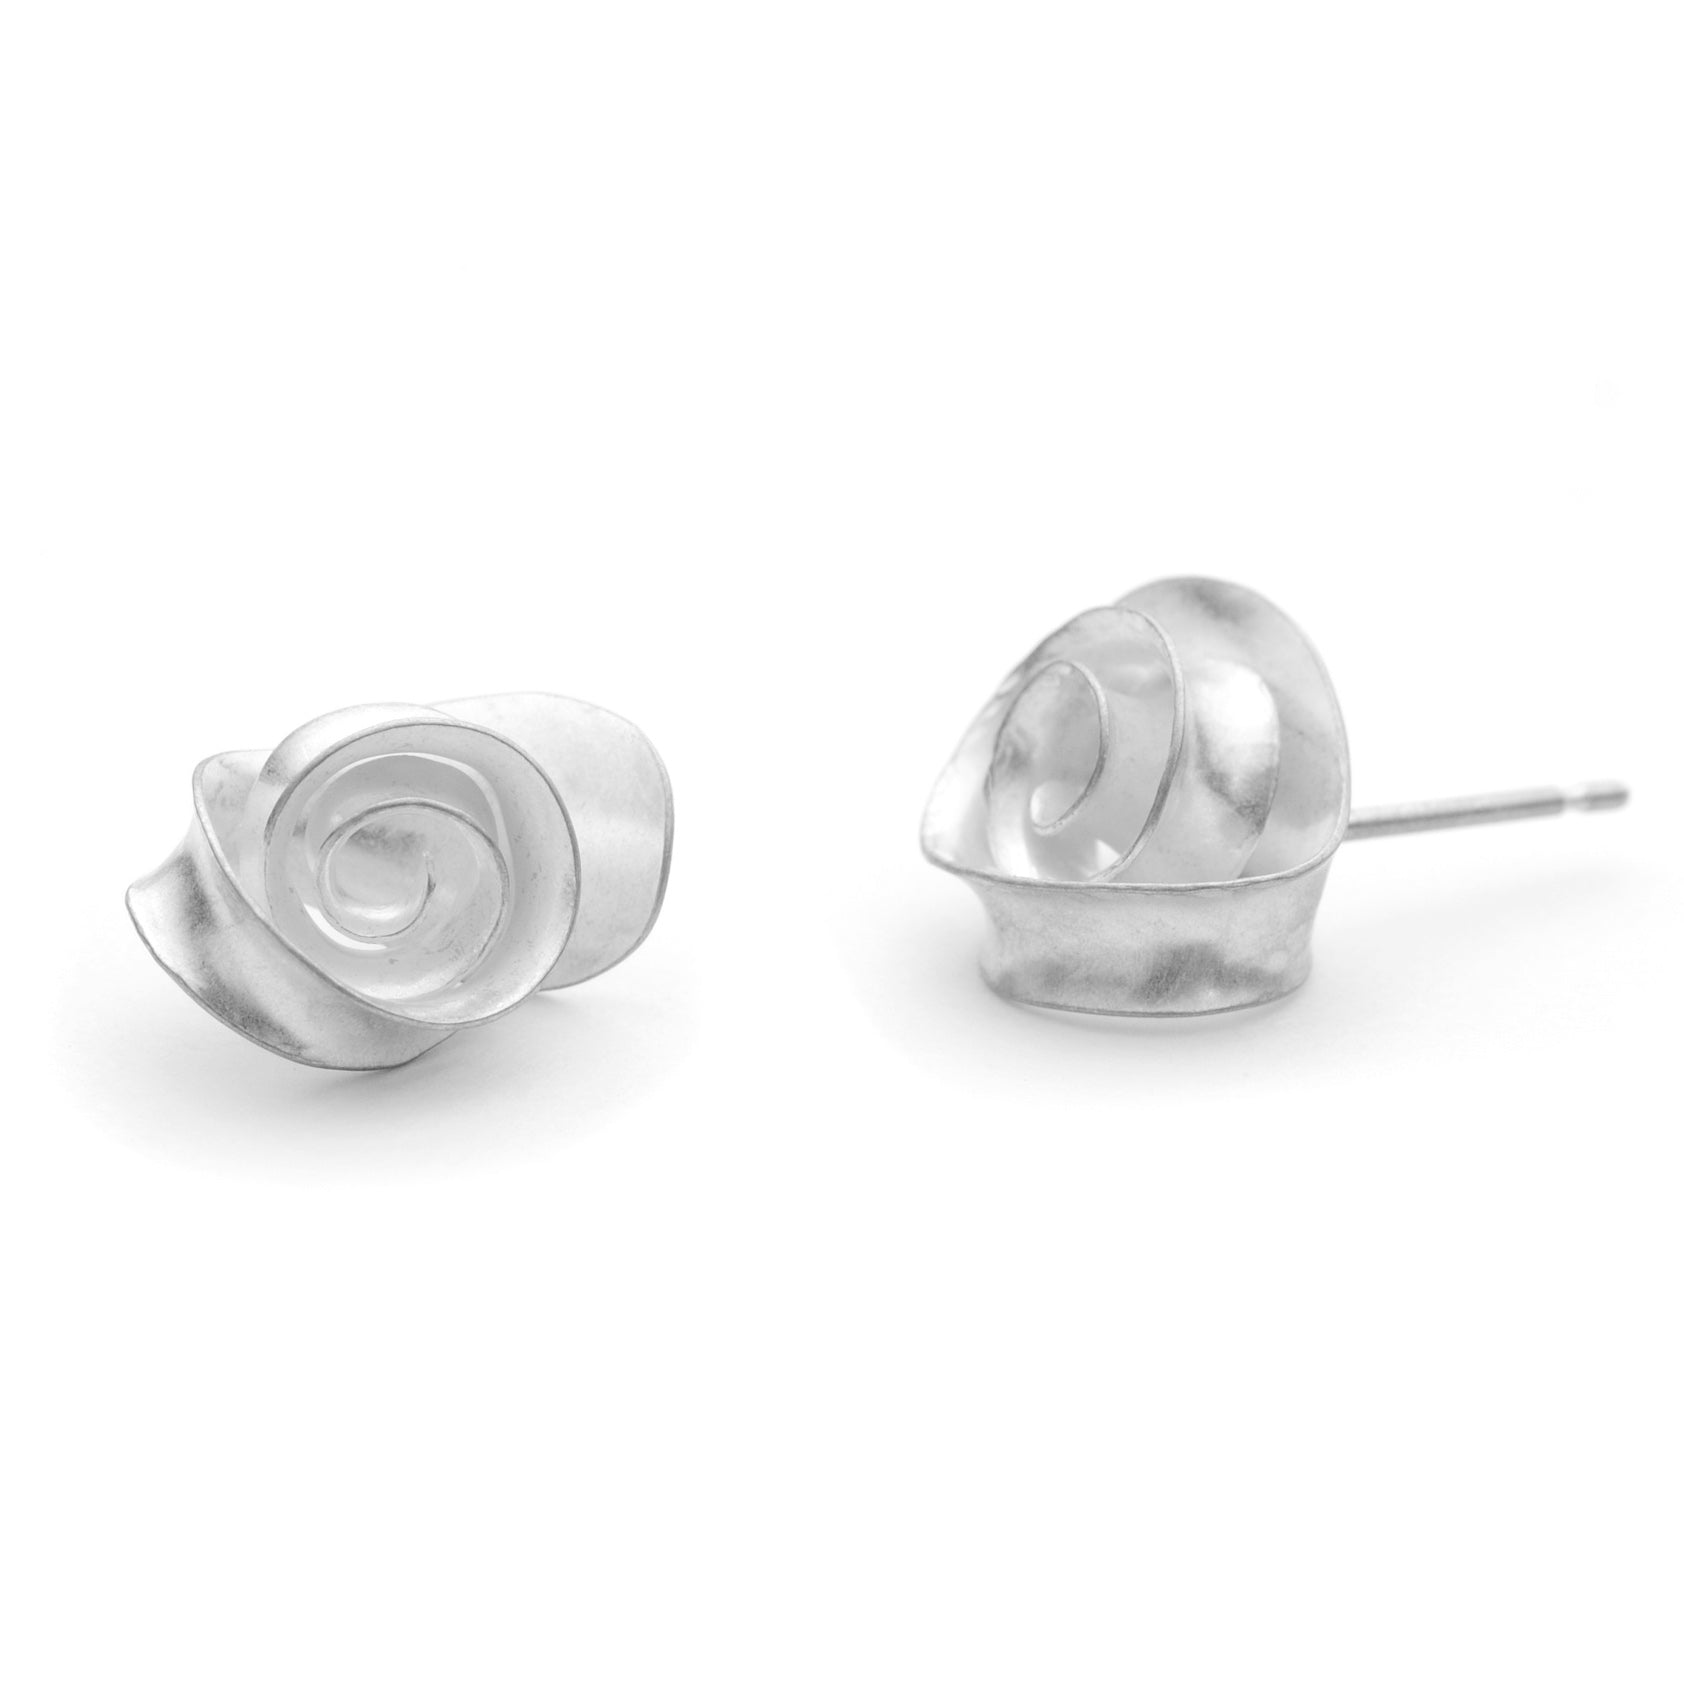 A peir of delicate swirl earrings made from recycled sterling silver. Each stud is made from a single piece of silver, with a spiralloing ribbon of metal twisting so that it lies flat against a curved backing. A different view, showing one stud from the front and the other from the side.